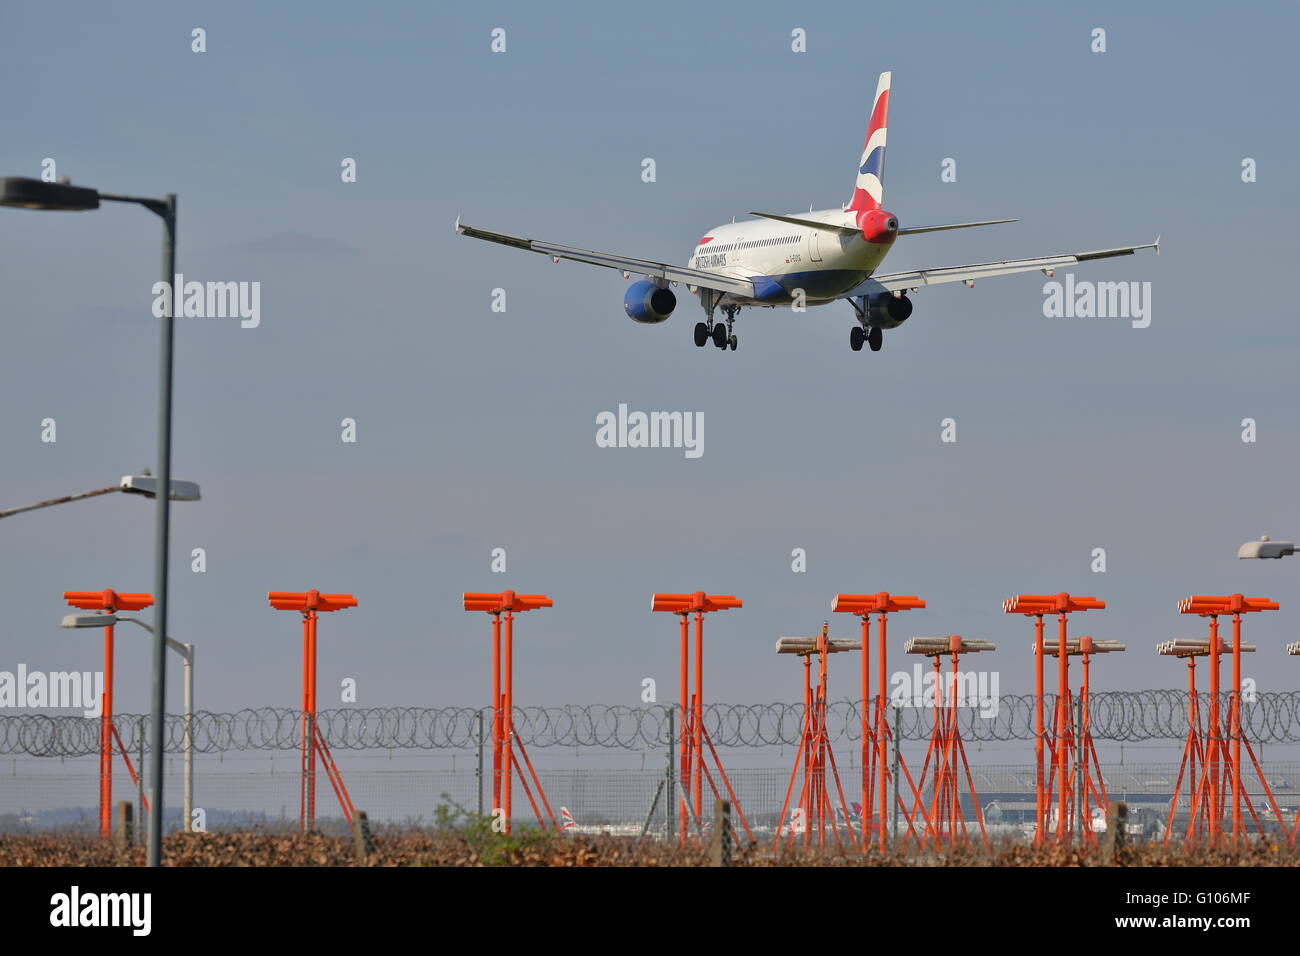 British Airways Airbus A320-200 G-EUYG in its final approach at London Heathrow Airport, UK, flying over the landing lights Stock Photo